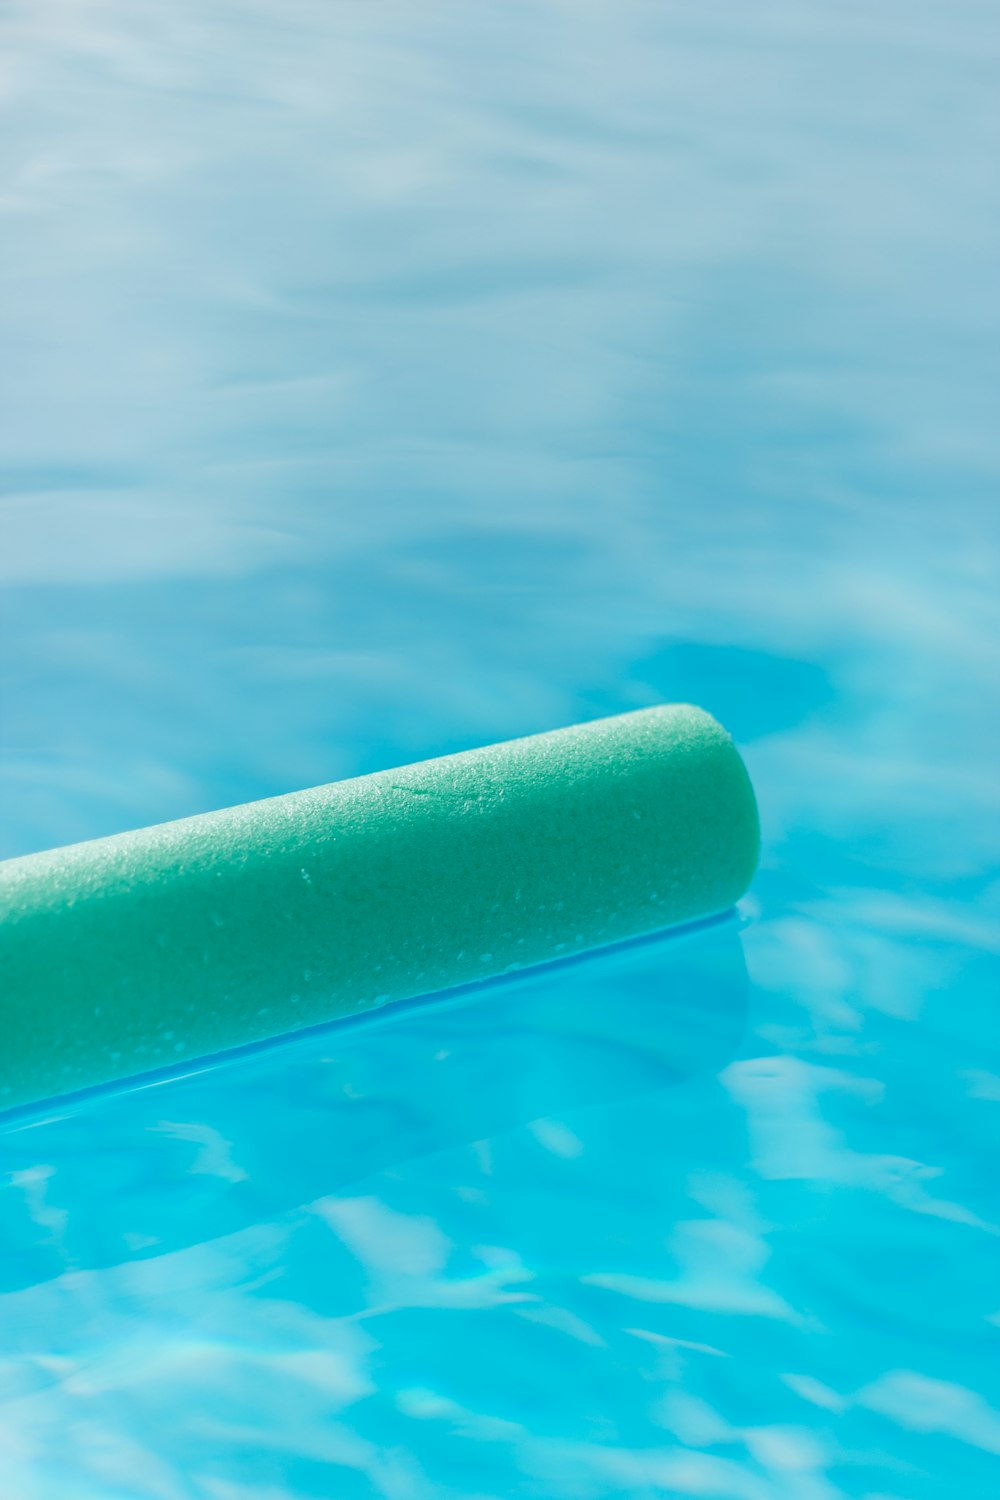 a green tube floating in a pool of water